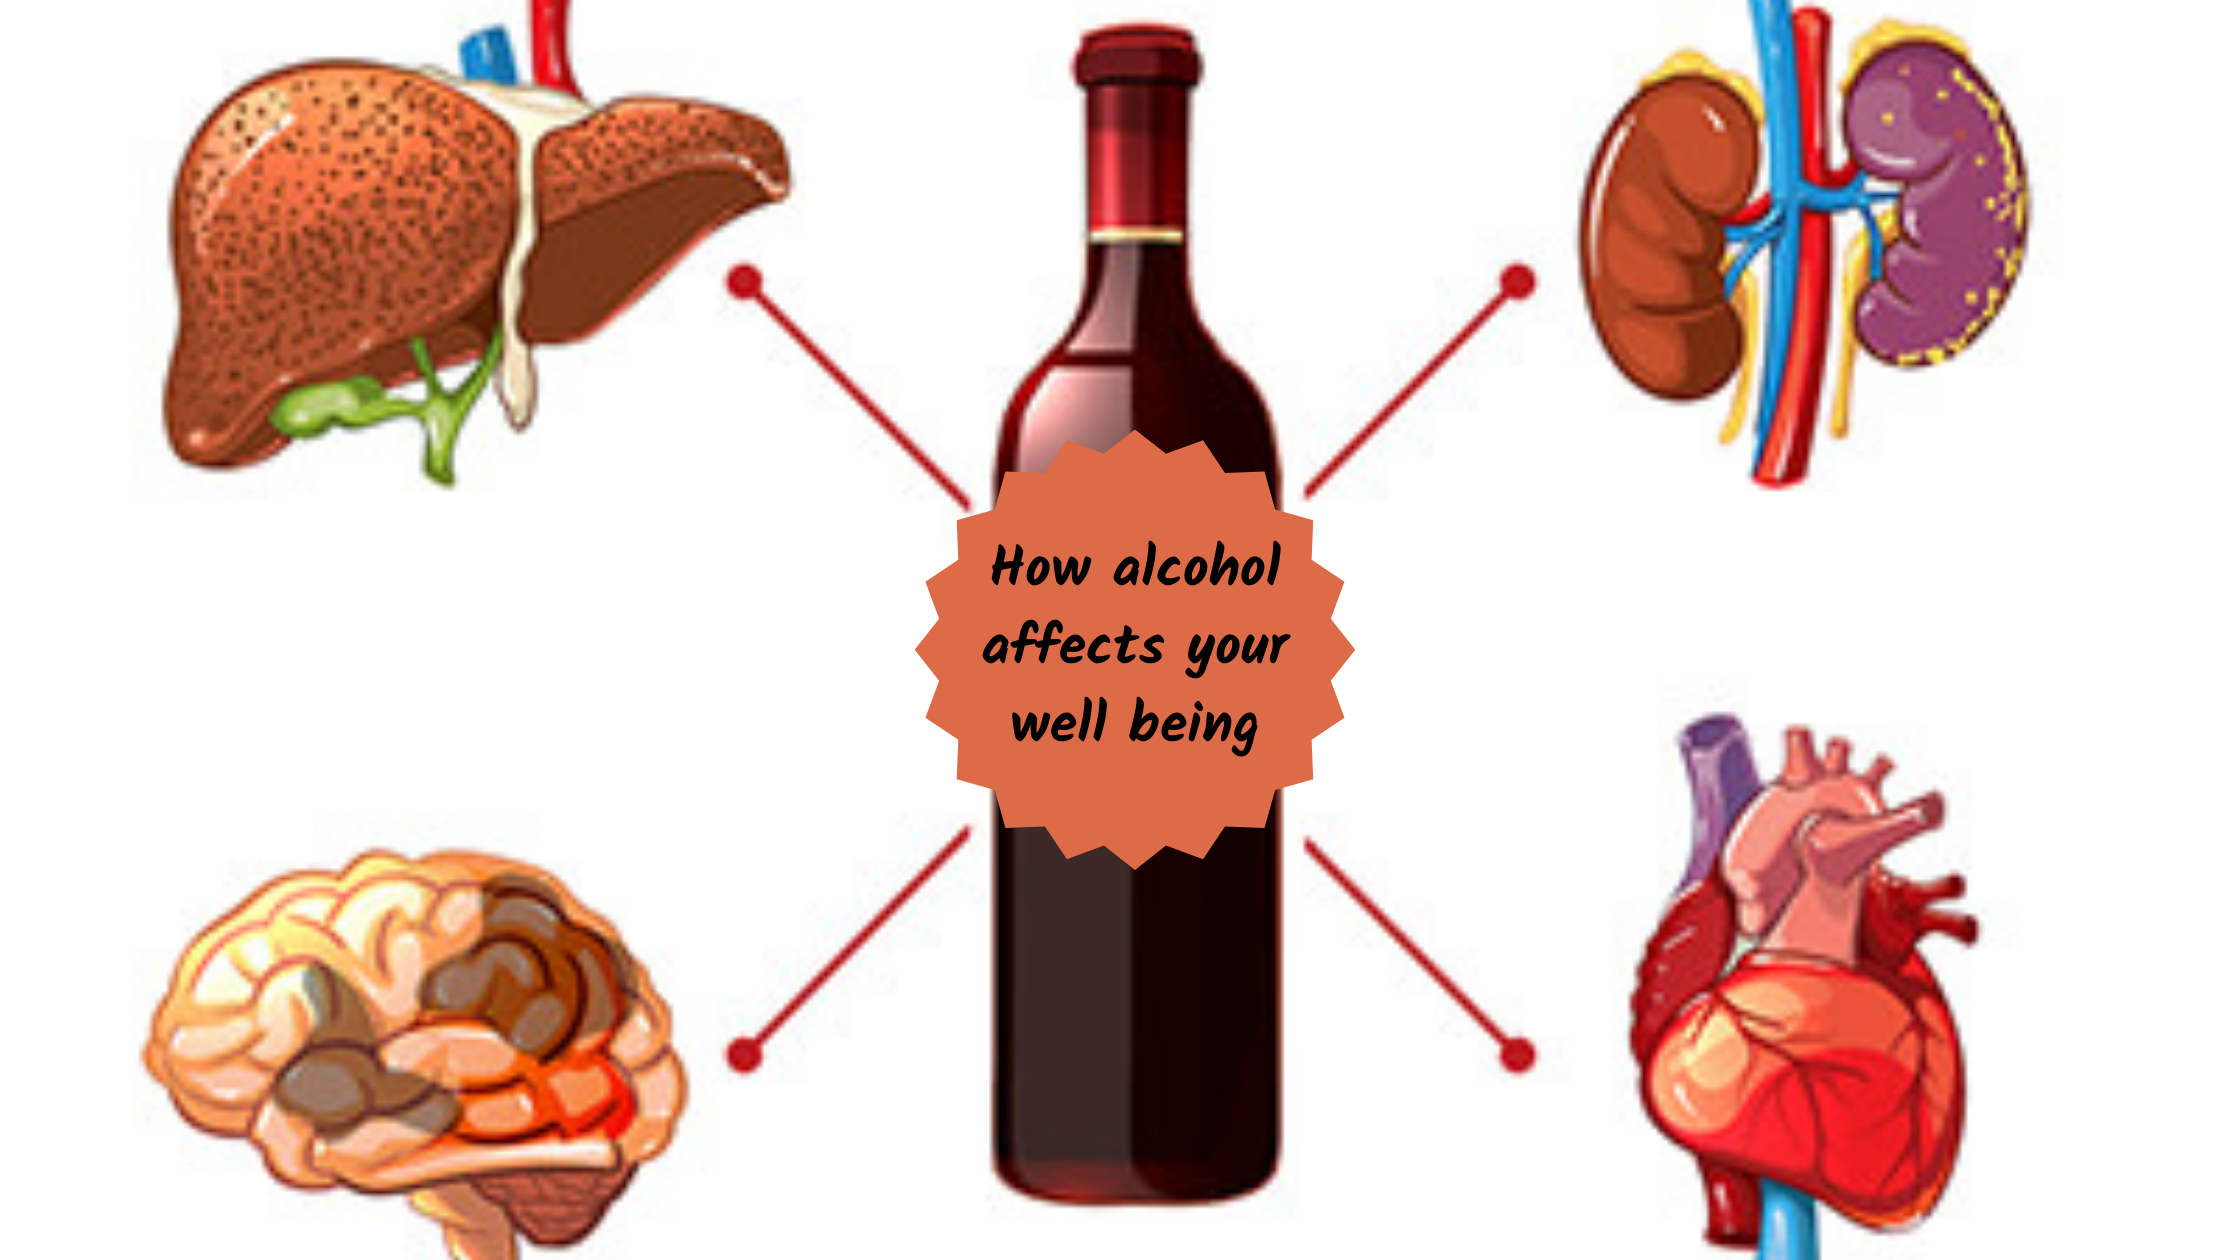 How alcohol affects your well being - II – Let'sLive